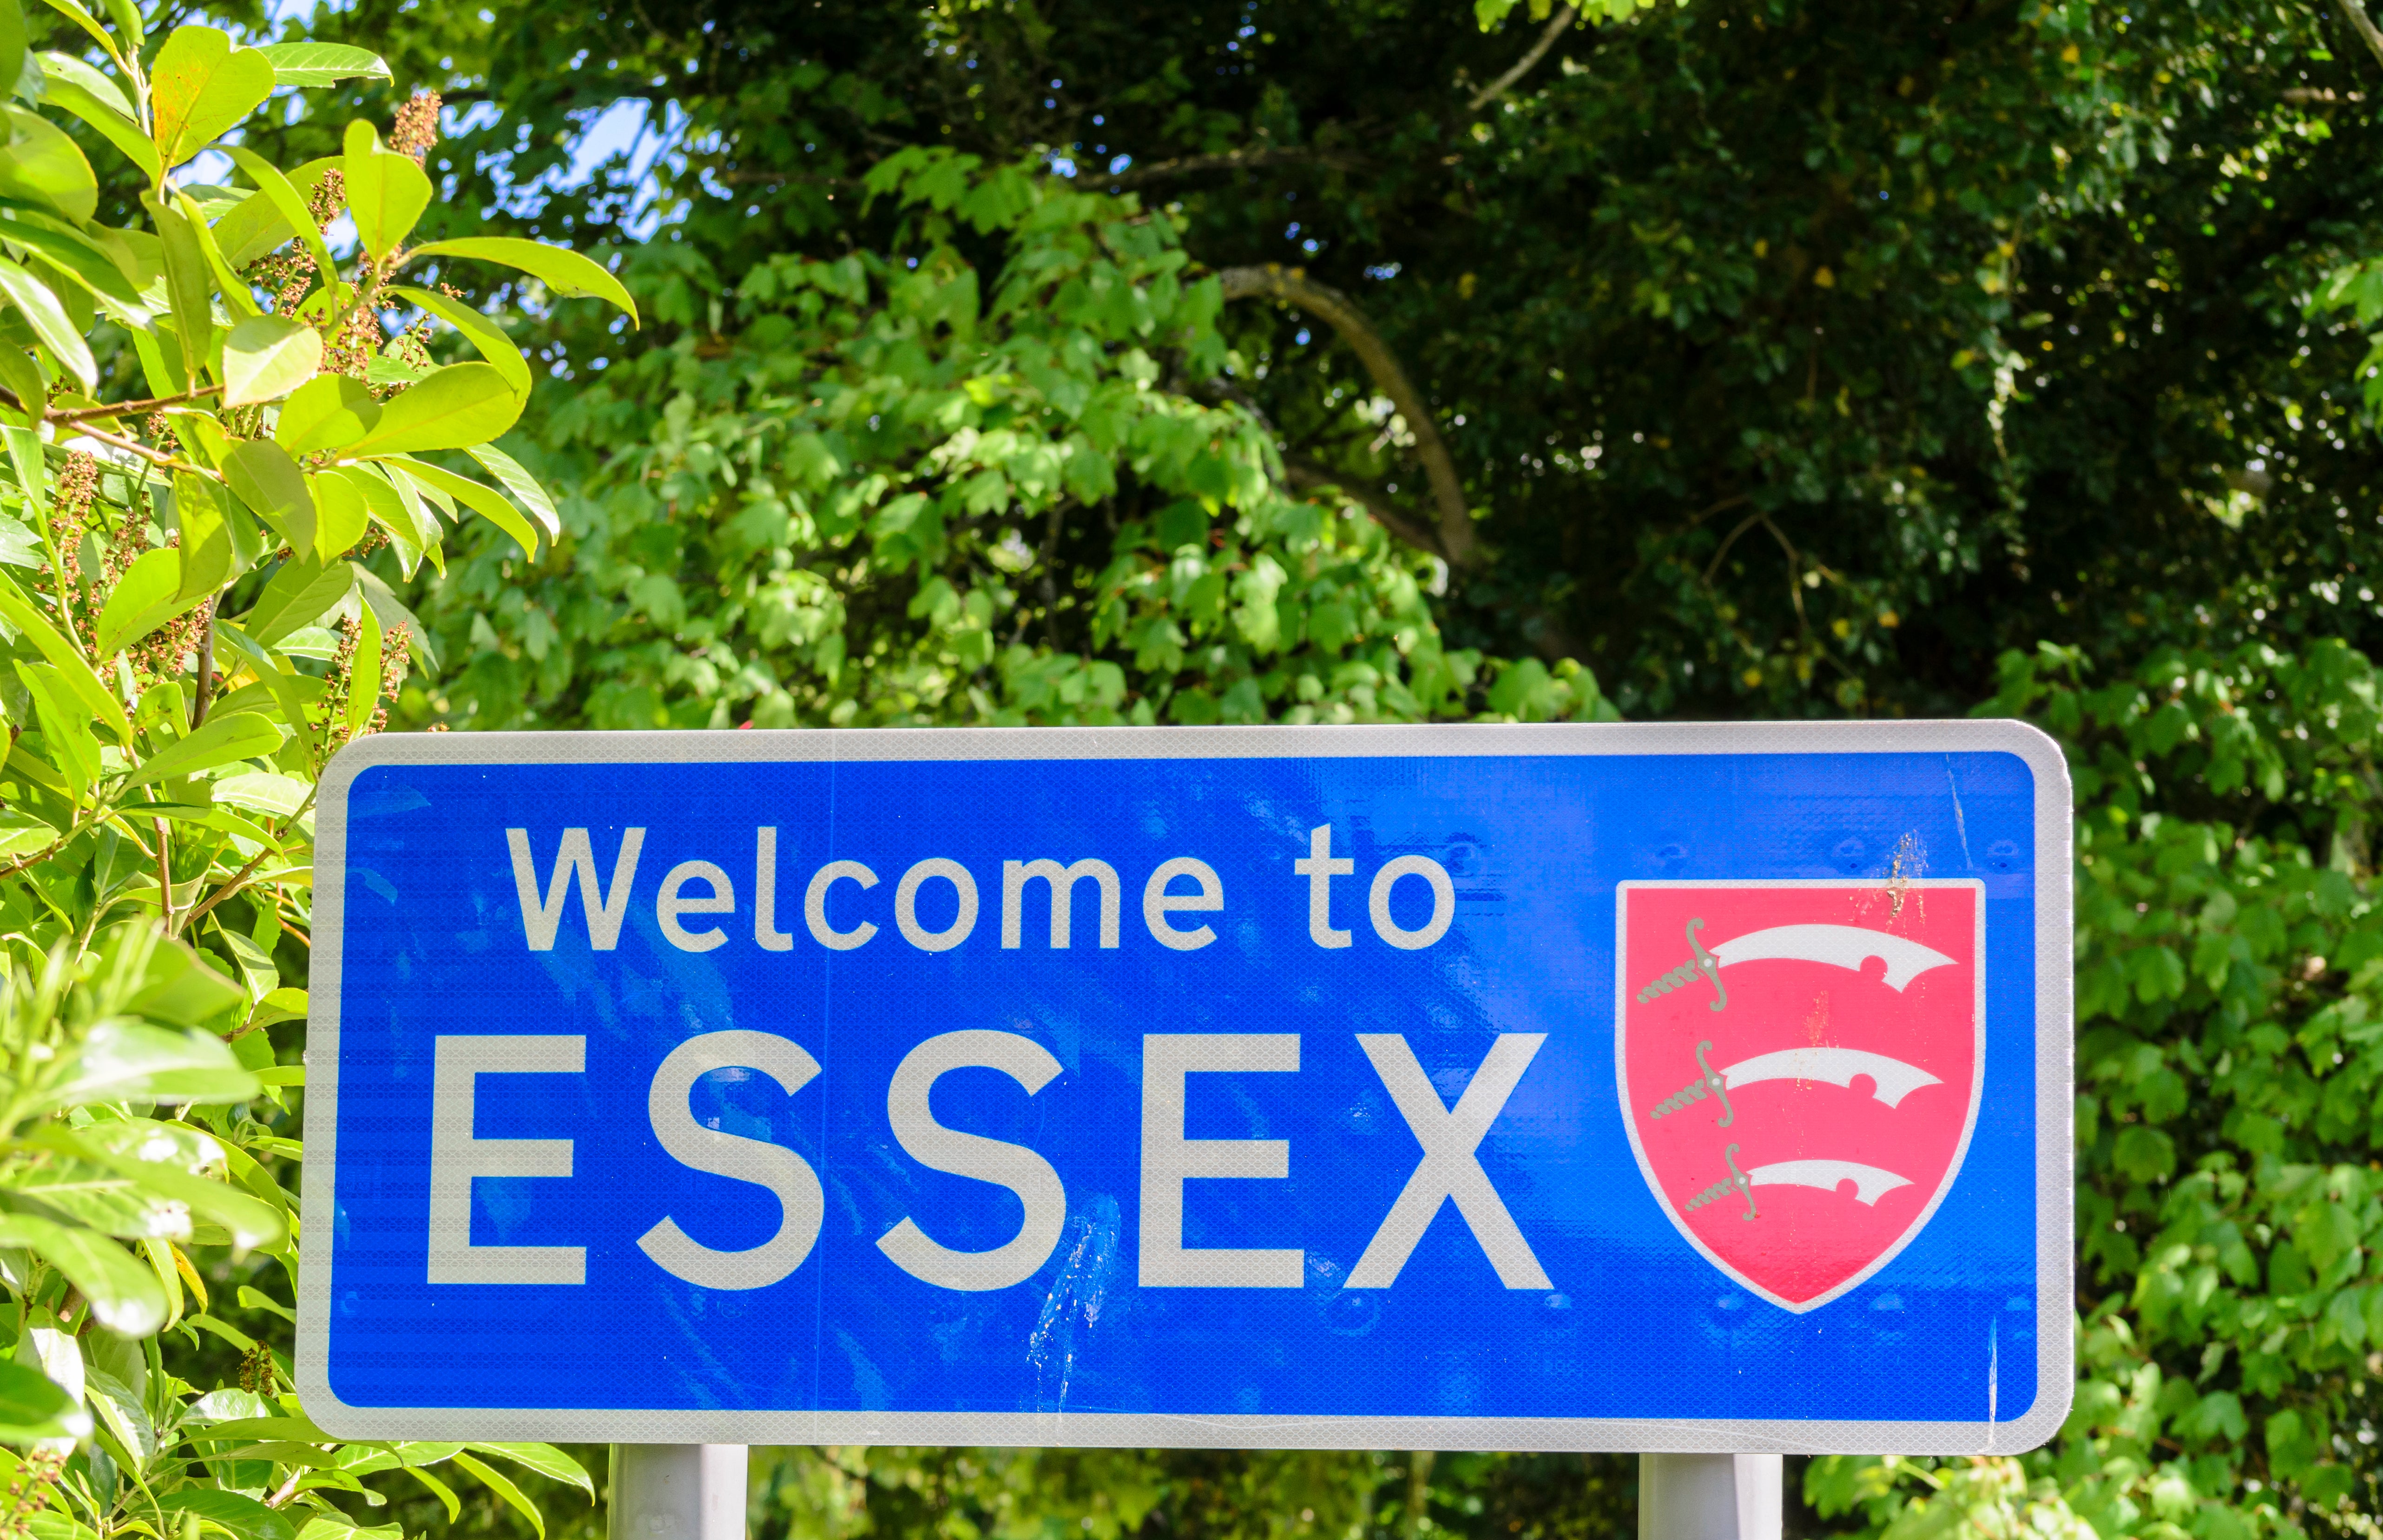 ‘Romford is Essex! Romford has always been part of the County of Essex, never East London,’ MP says on Twitter